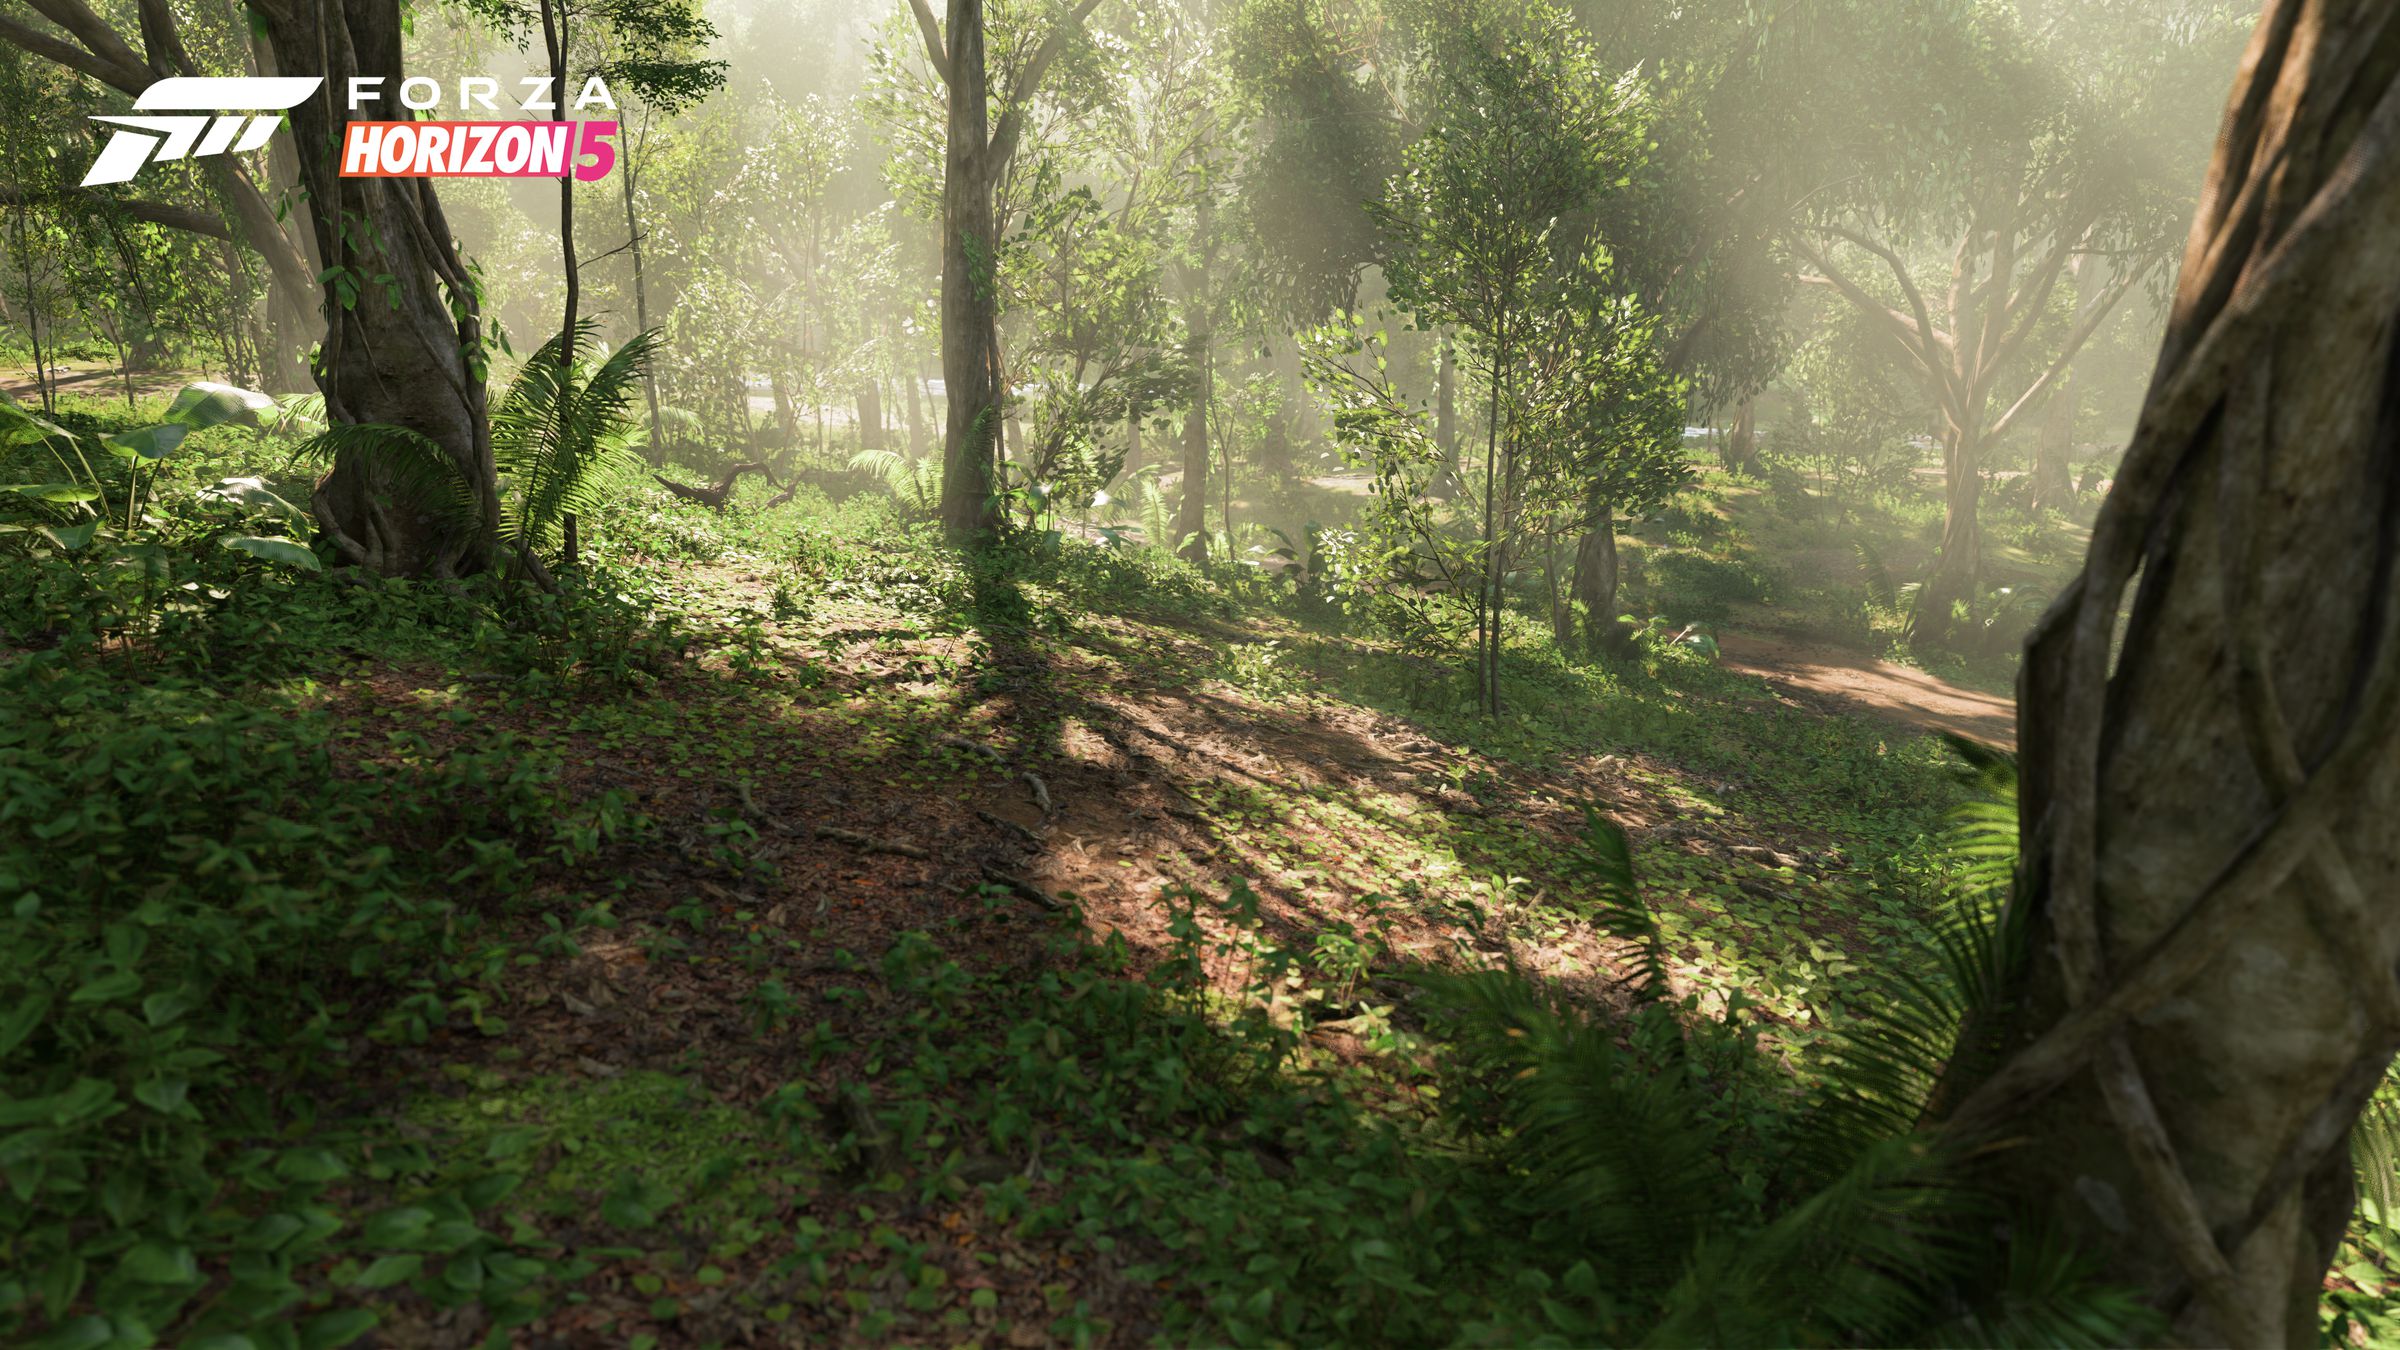 The jungle biome. You’ll see striking hidden temples as you’re driving through the lush environment.